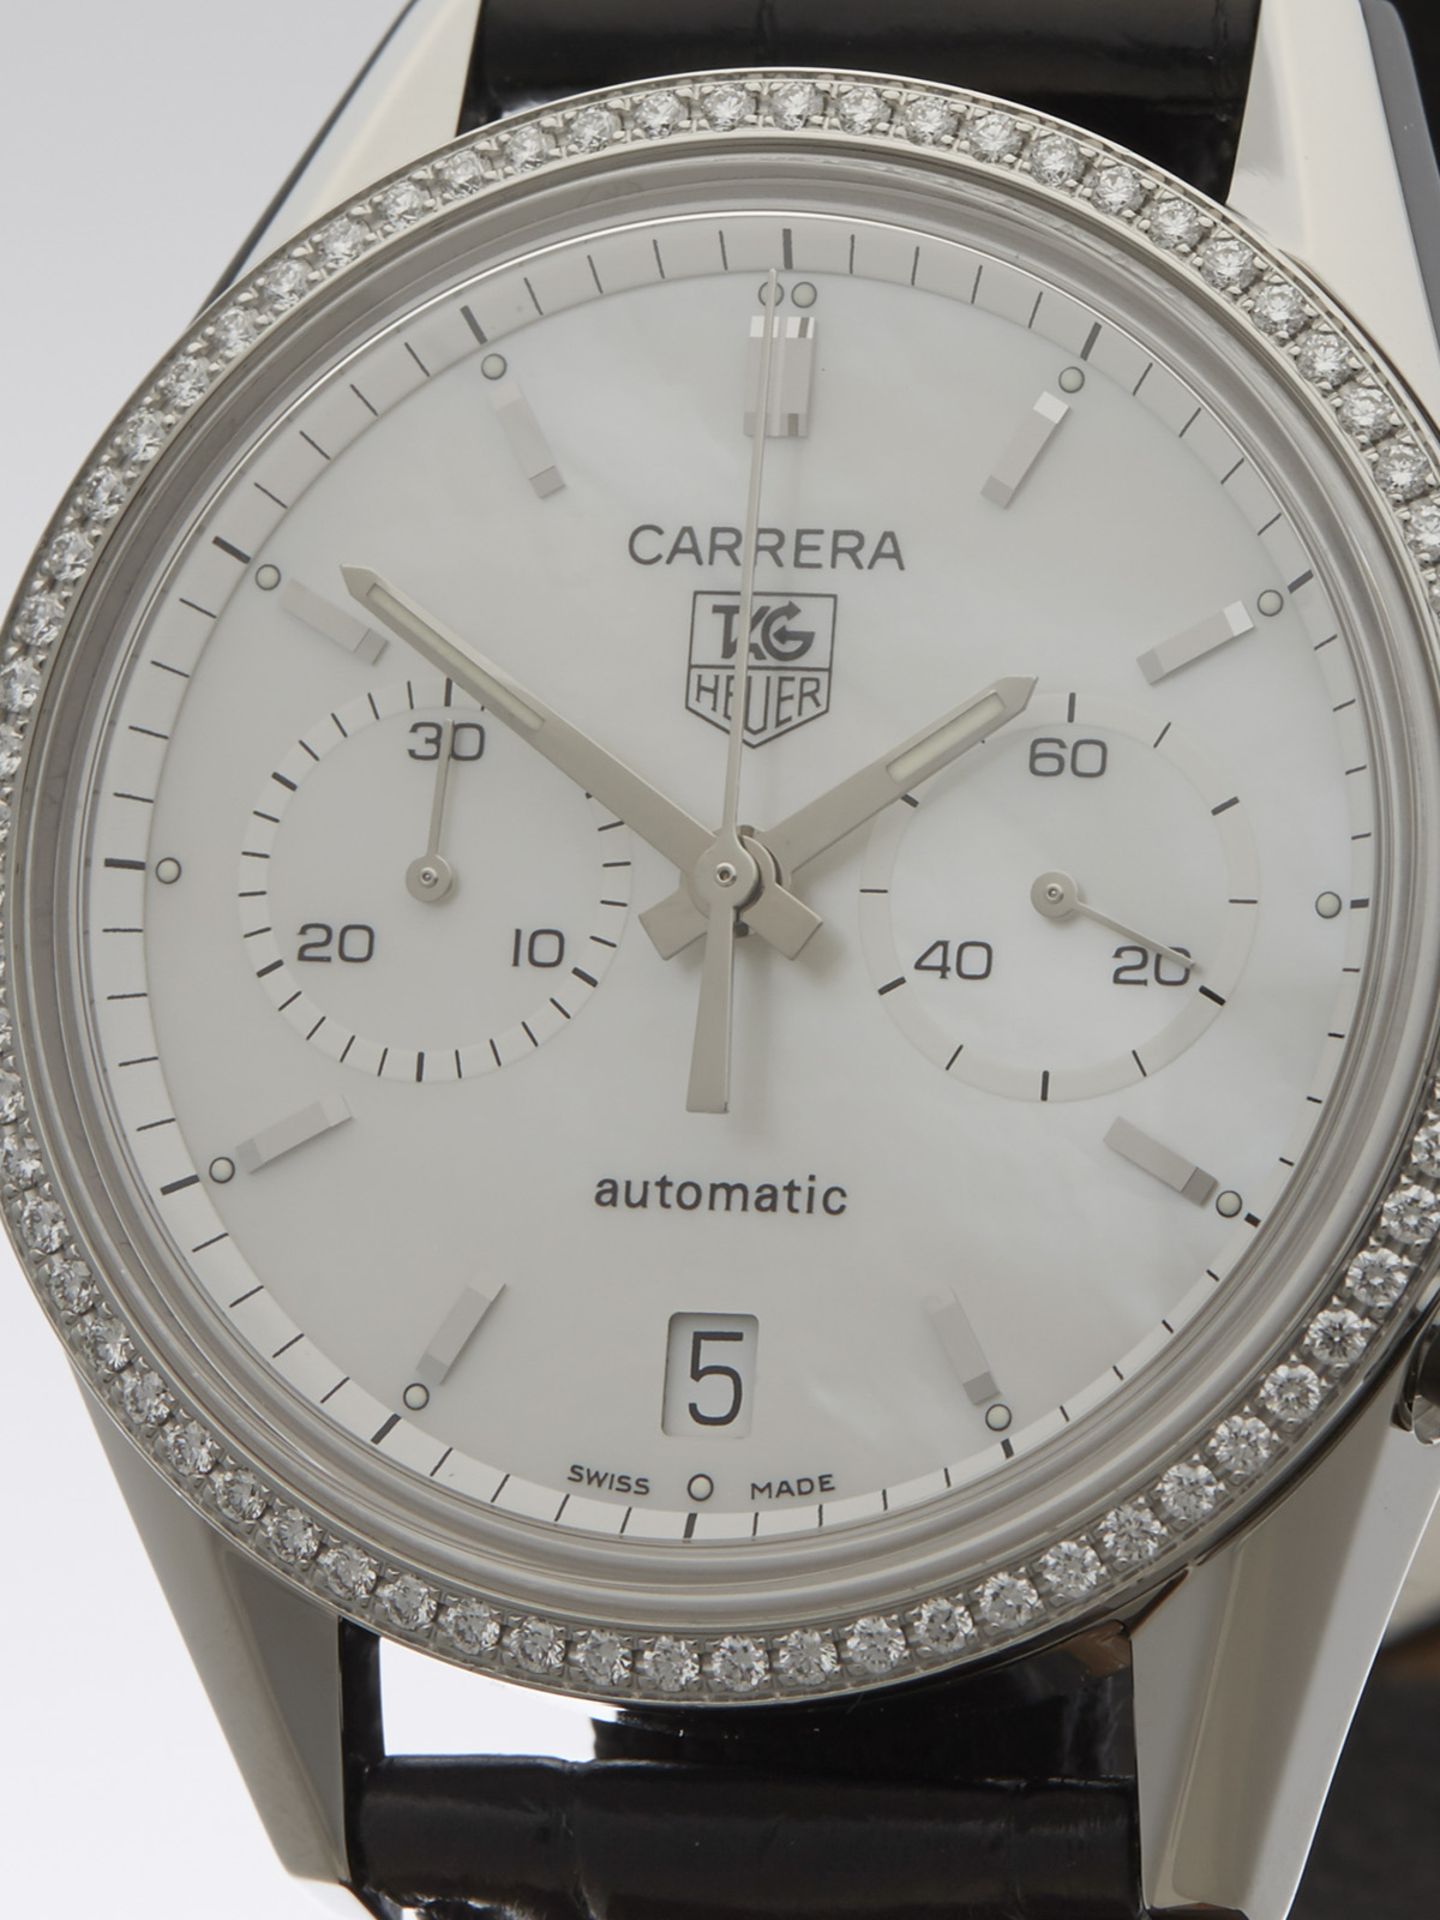 Tag Heuer Carrera - Image 3 of 9